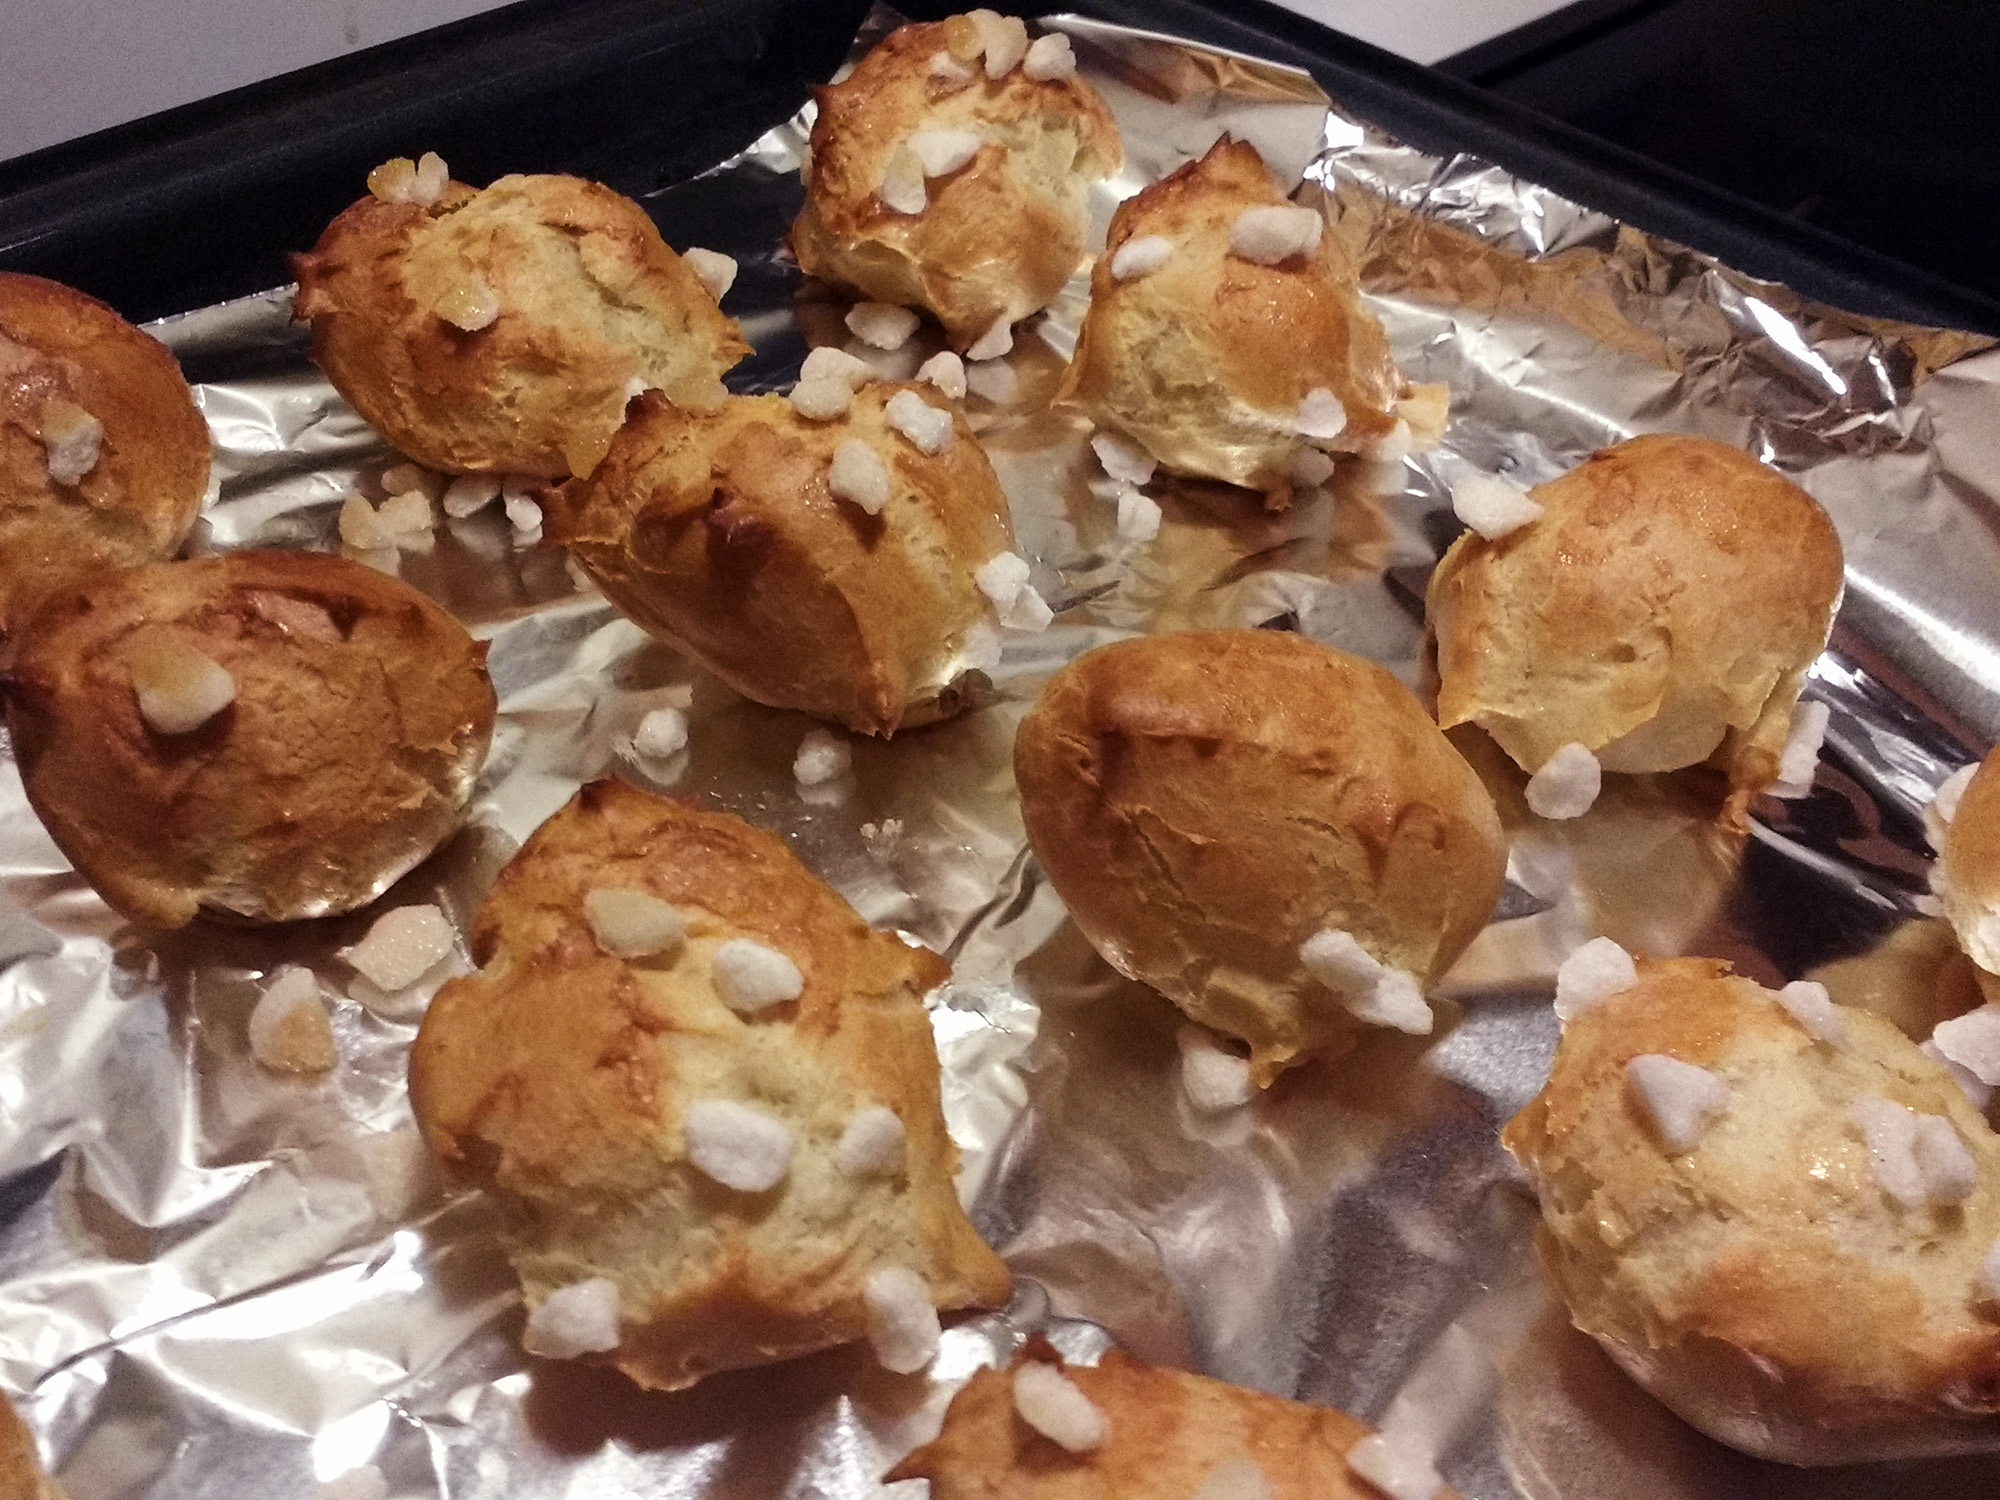 Making Chouquettes!